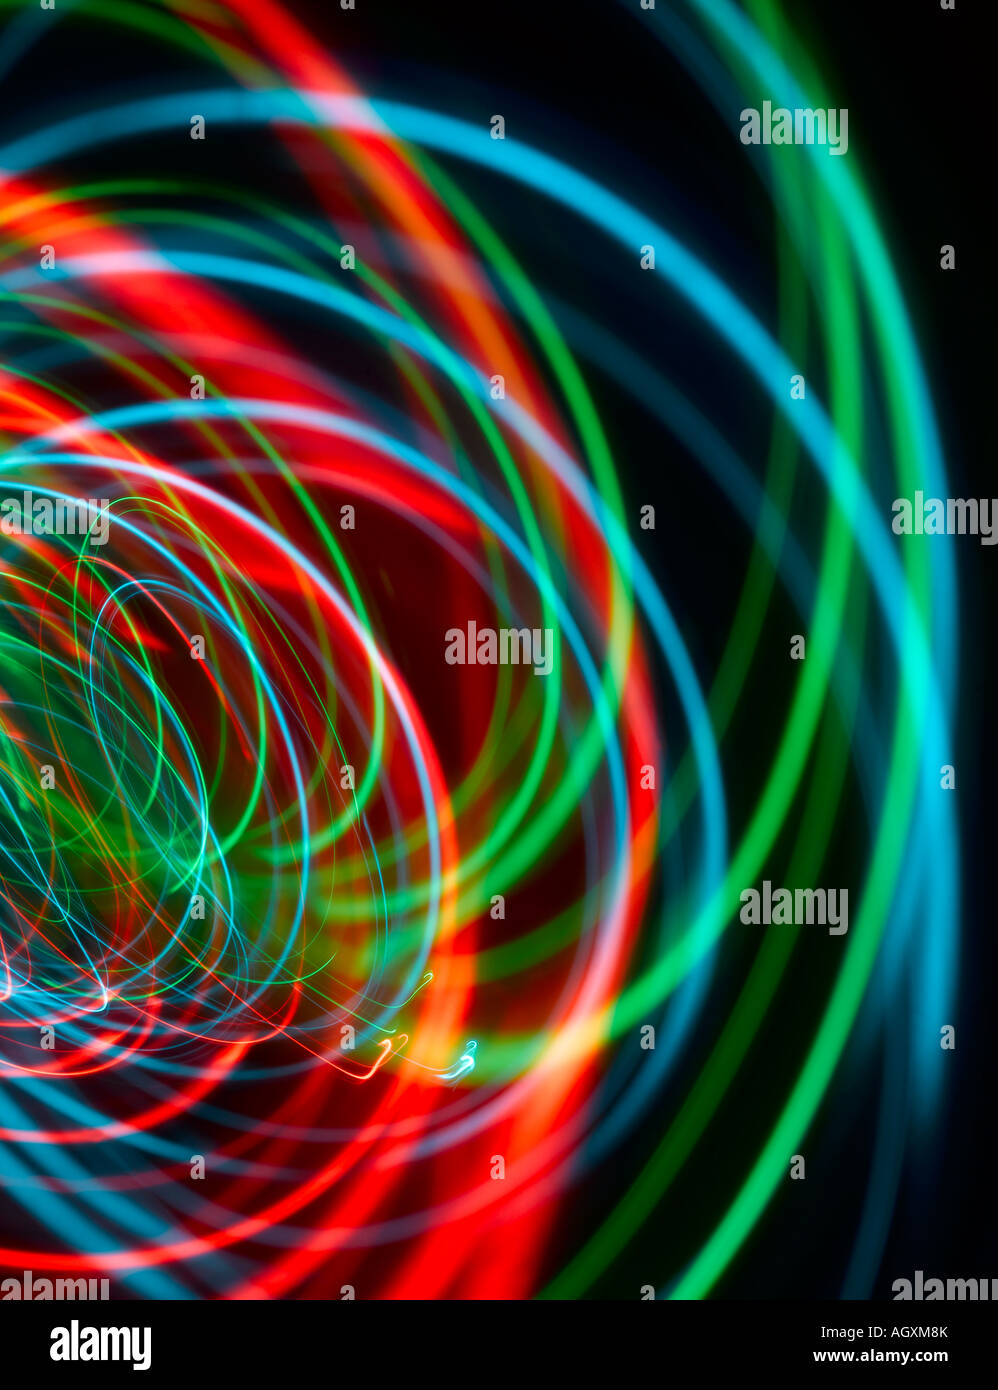 Red, green and blue sound or light waves Stock Photo